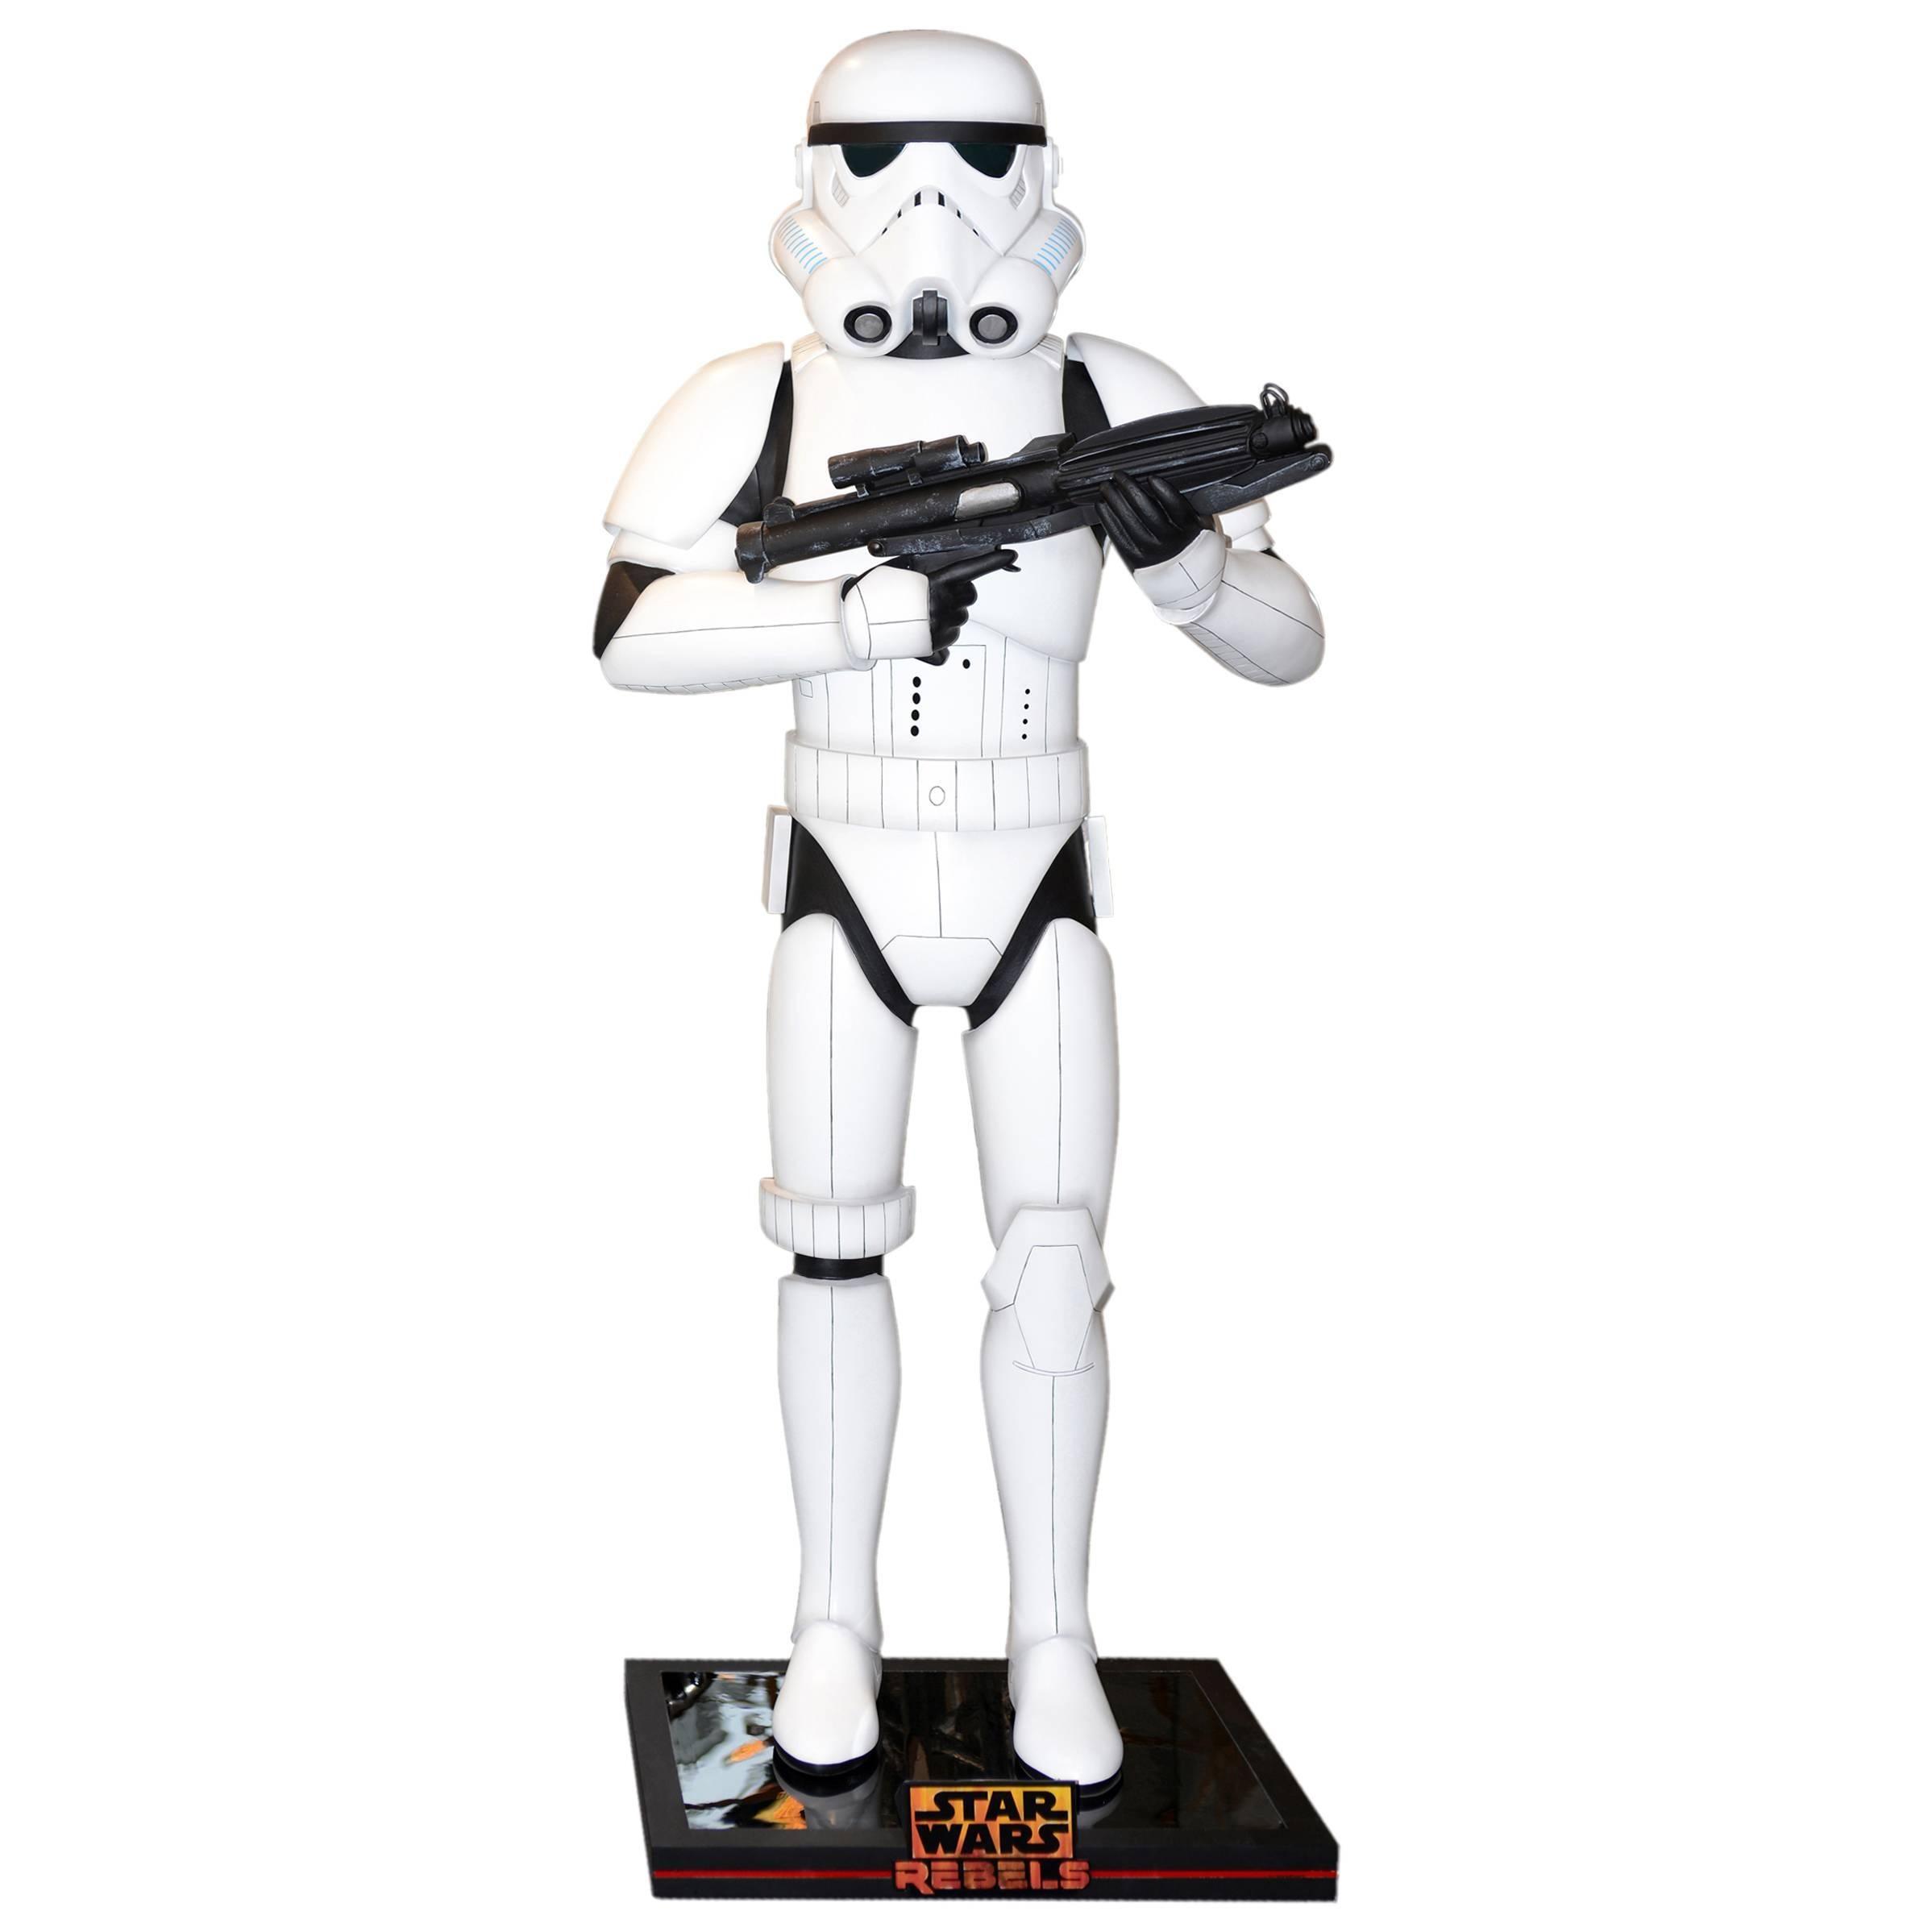 Stormtrooper Bent Arm Lifesize Star Wars Licensed Figure Limited Edition